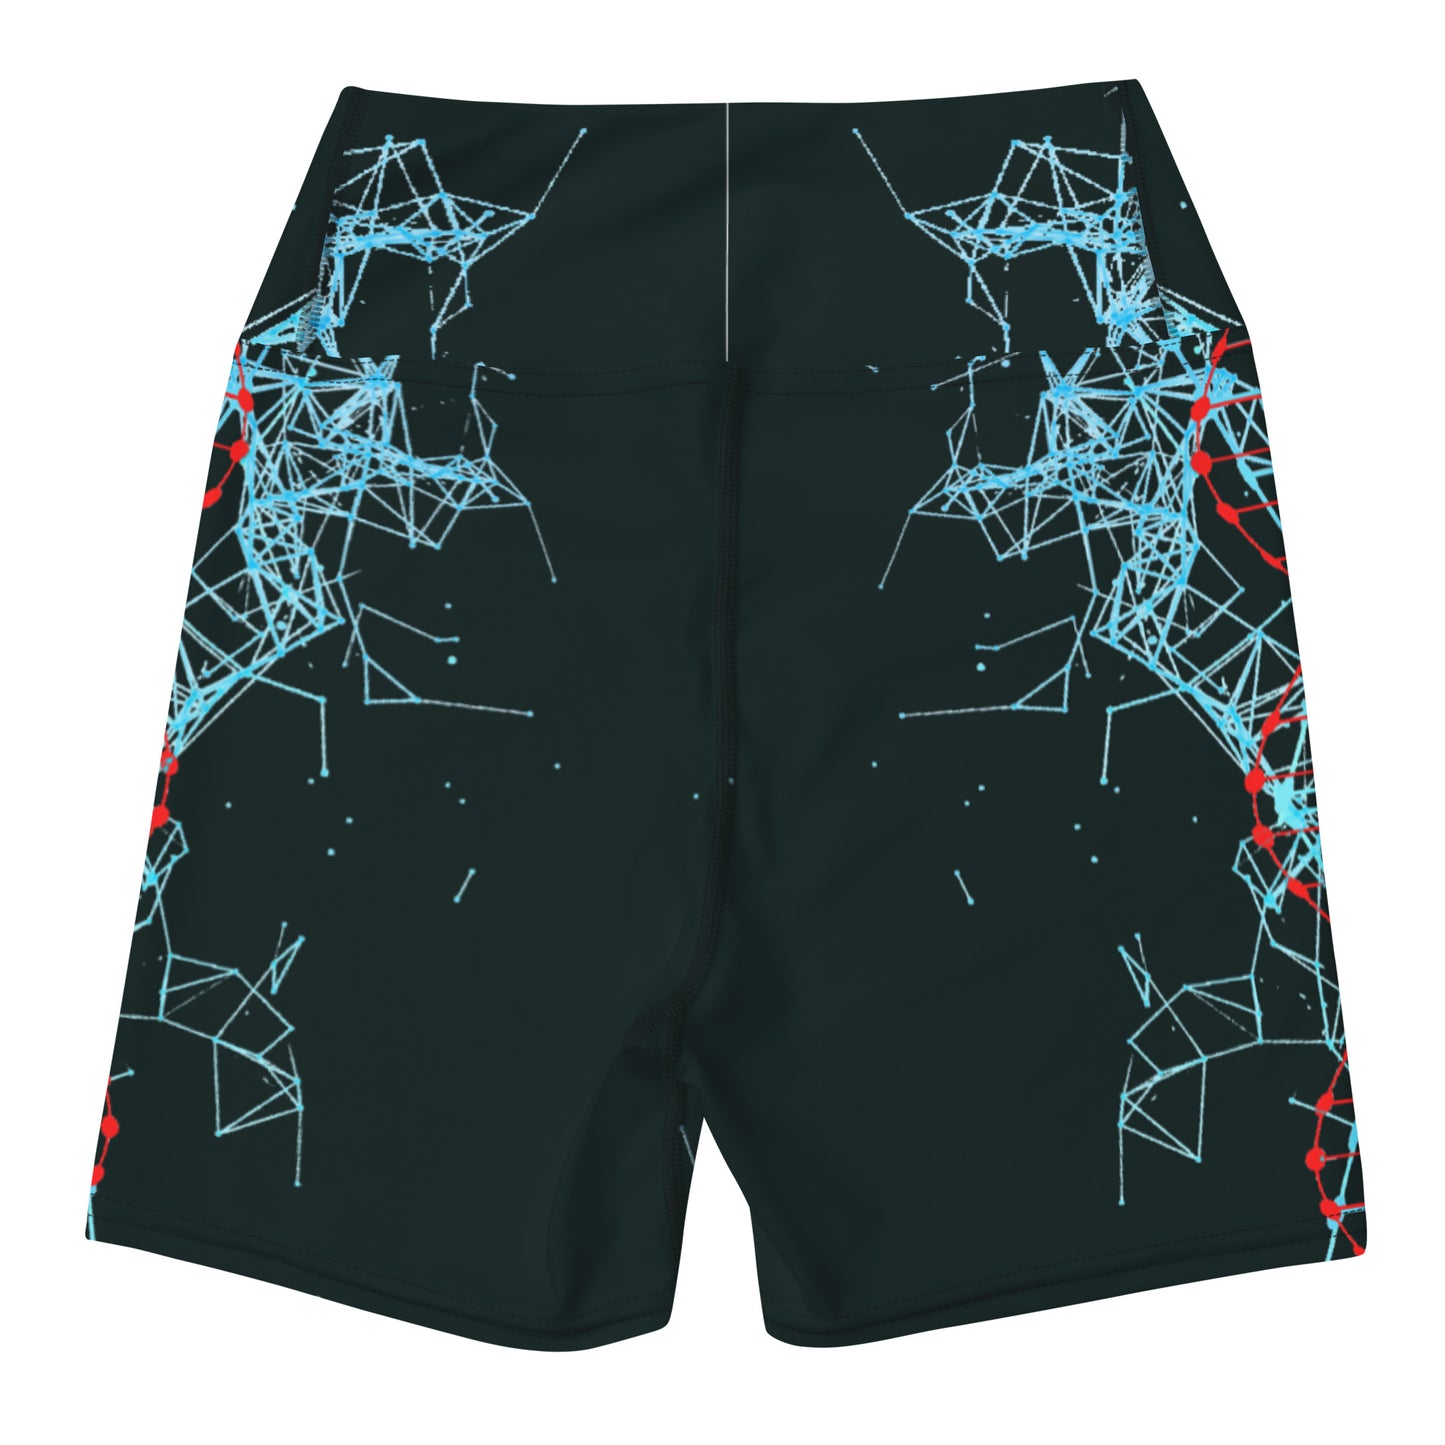 Genotype 2 - High-Waisted Shorts